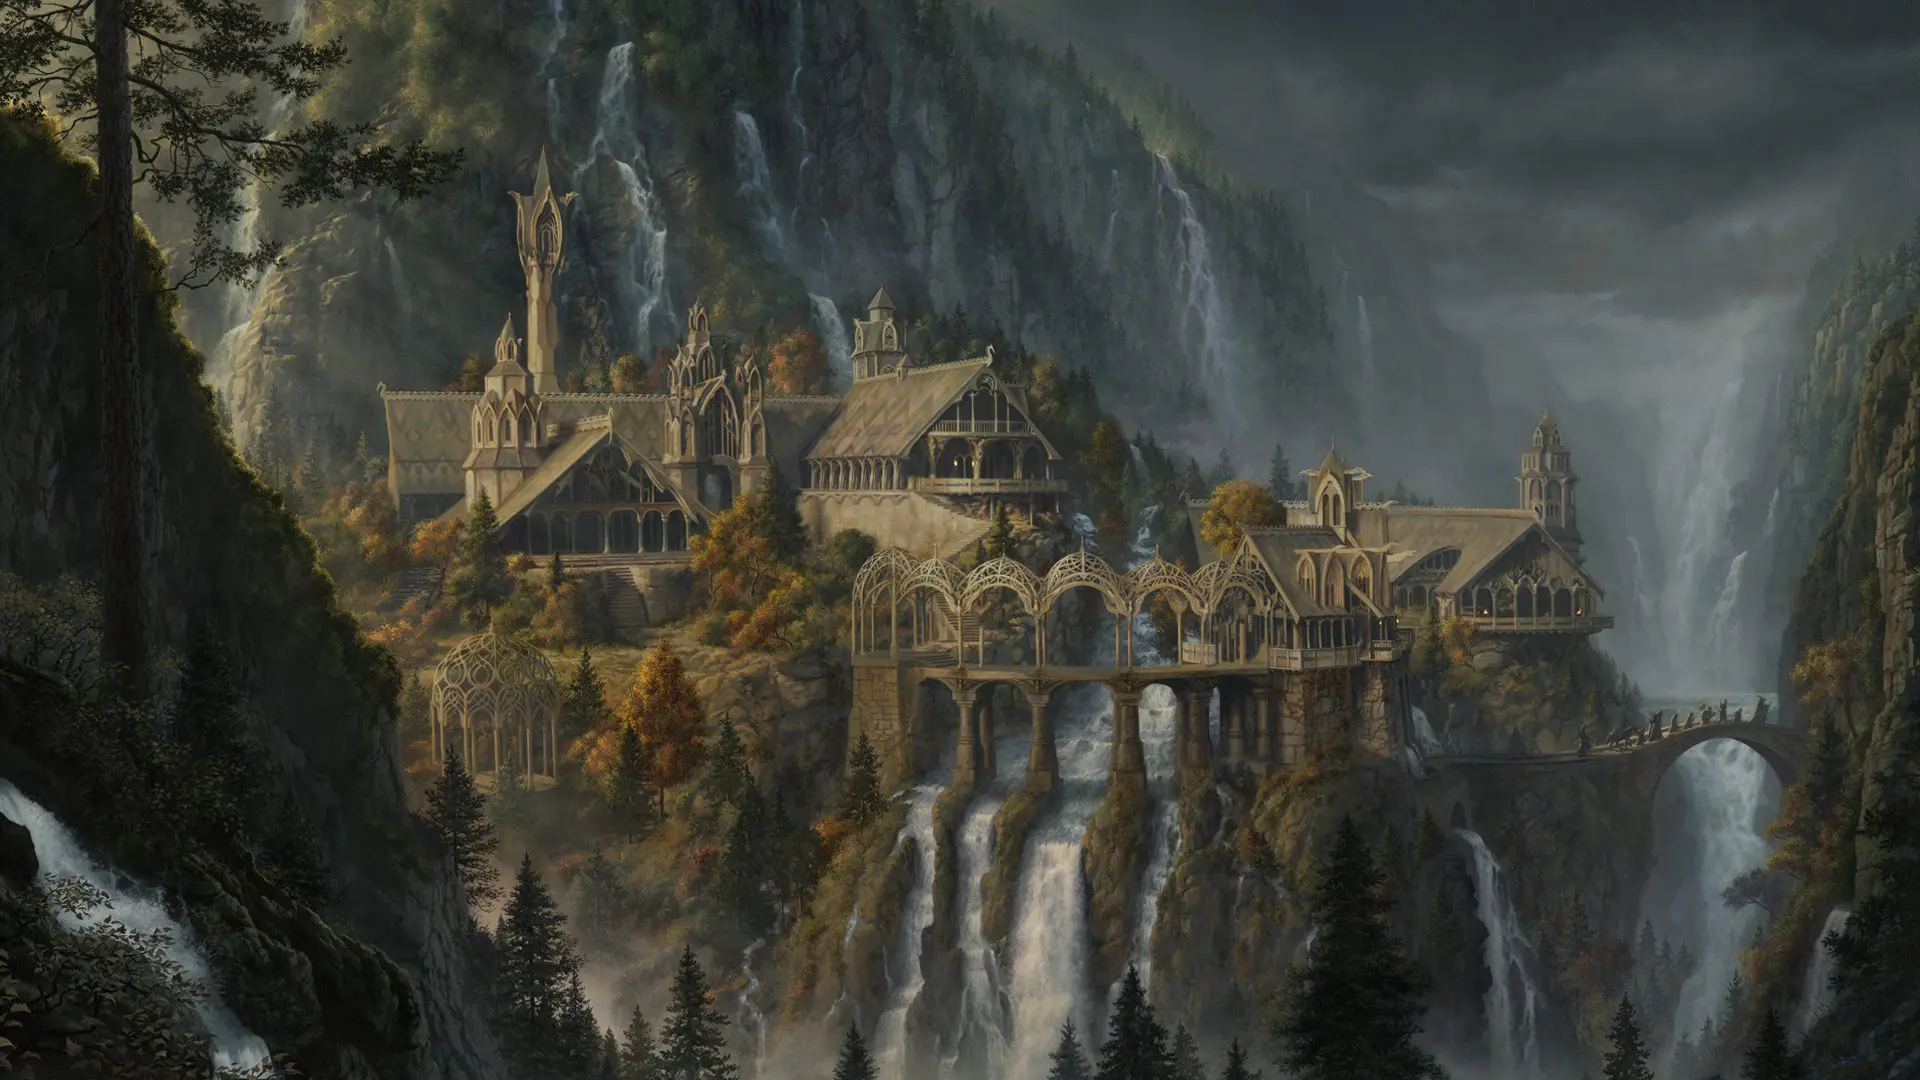 A painting of the town of rivendell